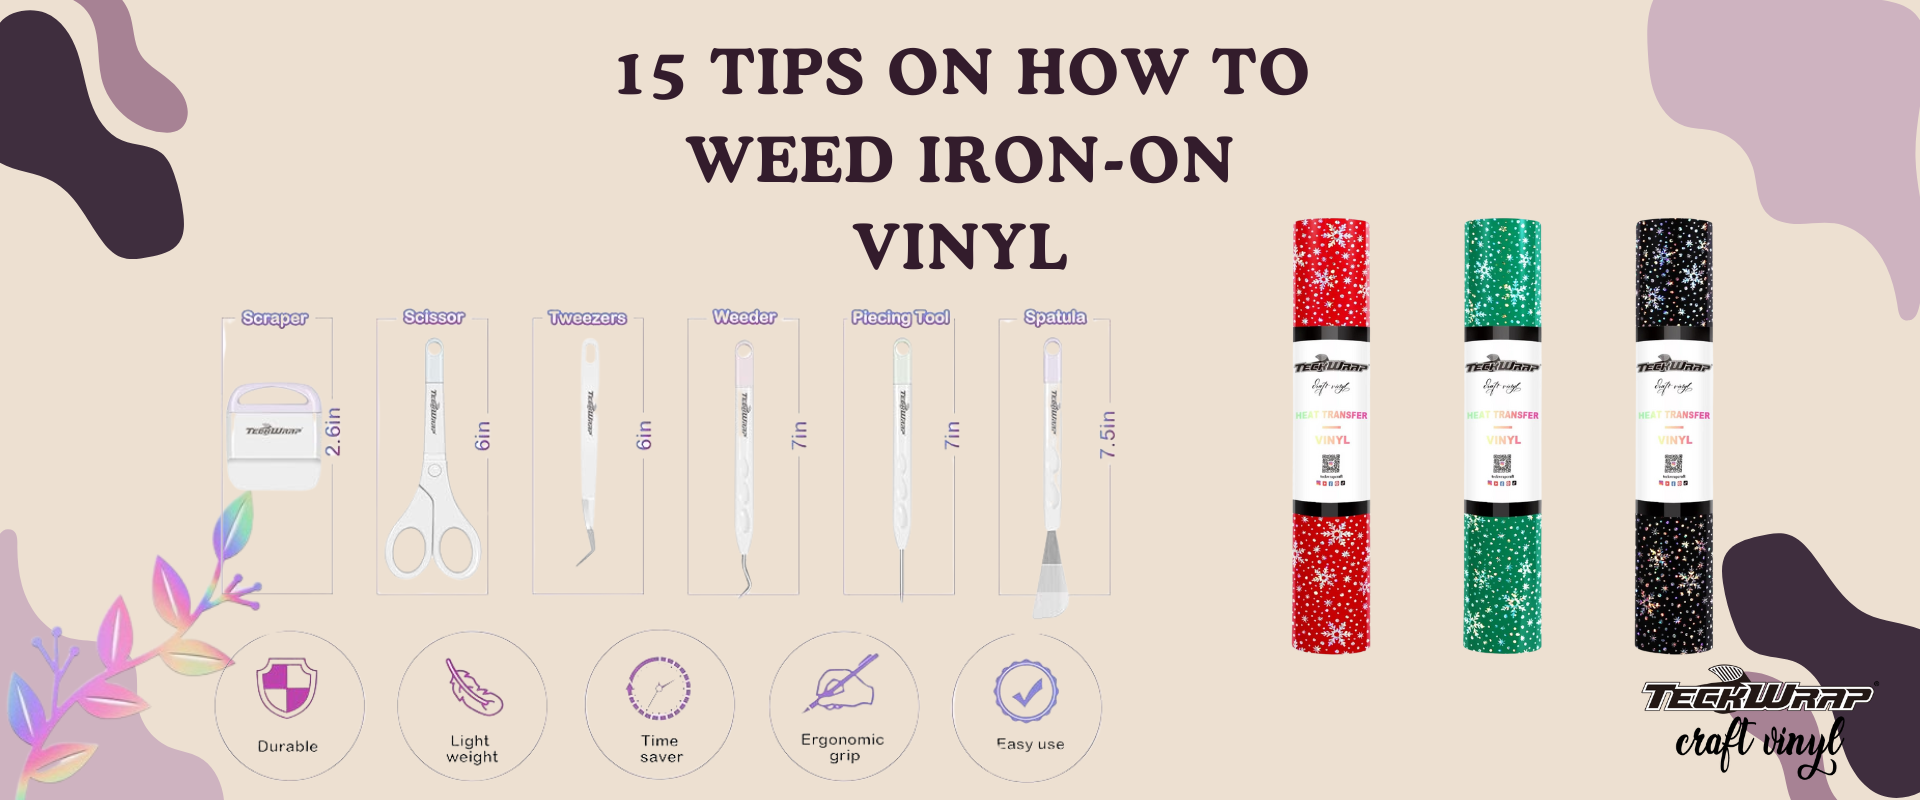 15 Tips On How To Weed Iron-On Vinyl (1).png__PID:8187c703-9b9e-4e07-ba7a-07c5679a93f7